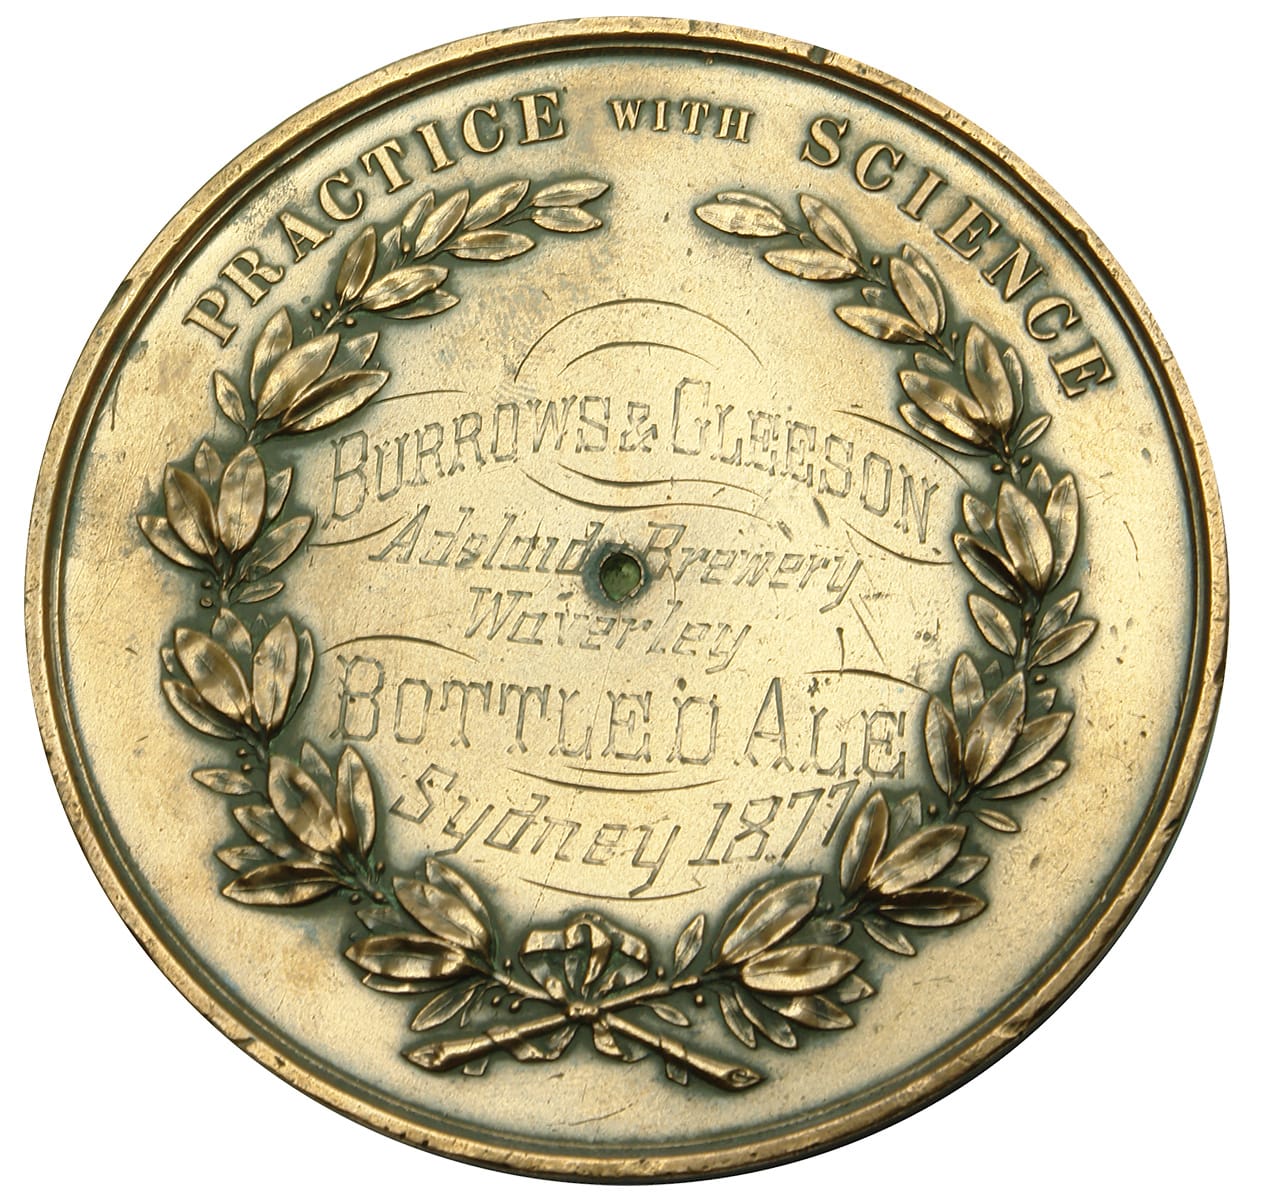 Burrows Gleeson Adelaide Brewery Waverley 1877 Agricultural Society NSW Medal